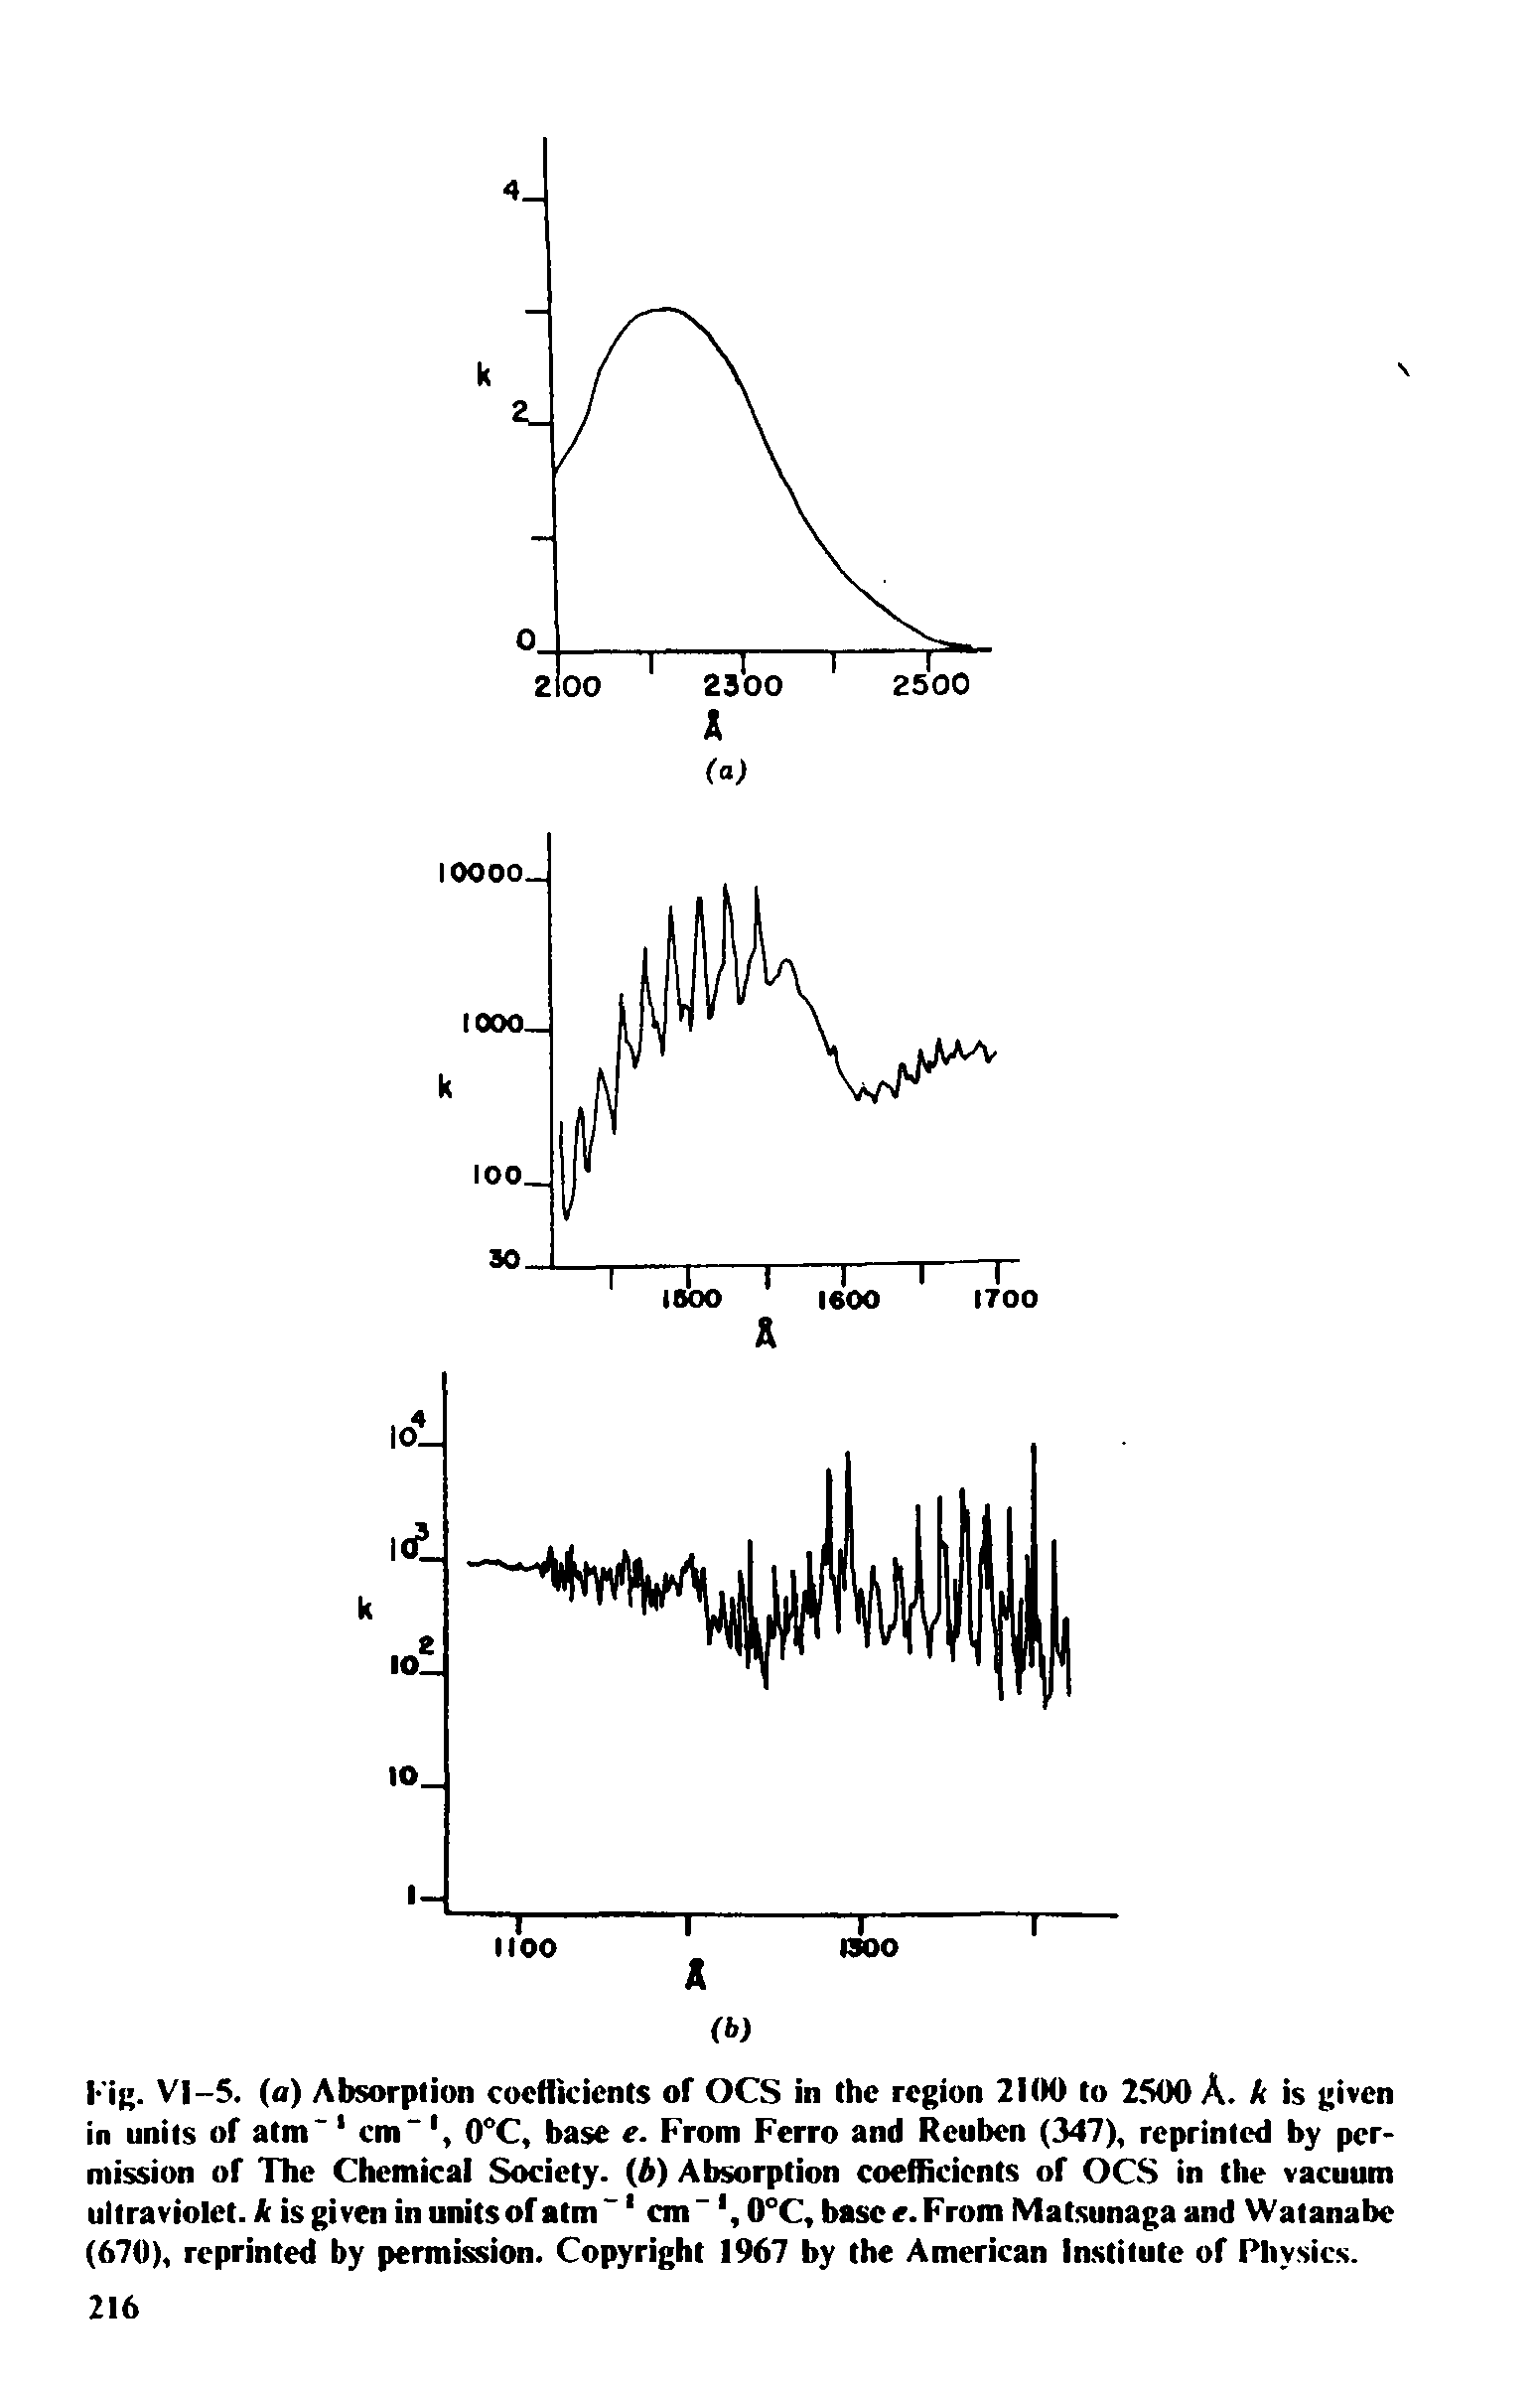 Fig. VI-5, (a) Absorption coefficients or OCS in the region 2100 to 2500 A. k is given in units of atm 1 cm" 0°C, base e. From Ferro and Reuben (347), reprinted by permission of The Chemical Society. (b) Absorption coefficients of OCS in the vacuum ultraviolet, k is given in units of atm 1 cm 1,0°C, base e. From Matsunaga and Watanabc (670), reprinted by permission. Copyright 1967 by the American Institute of Physics.